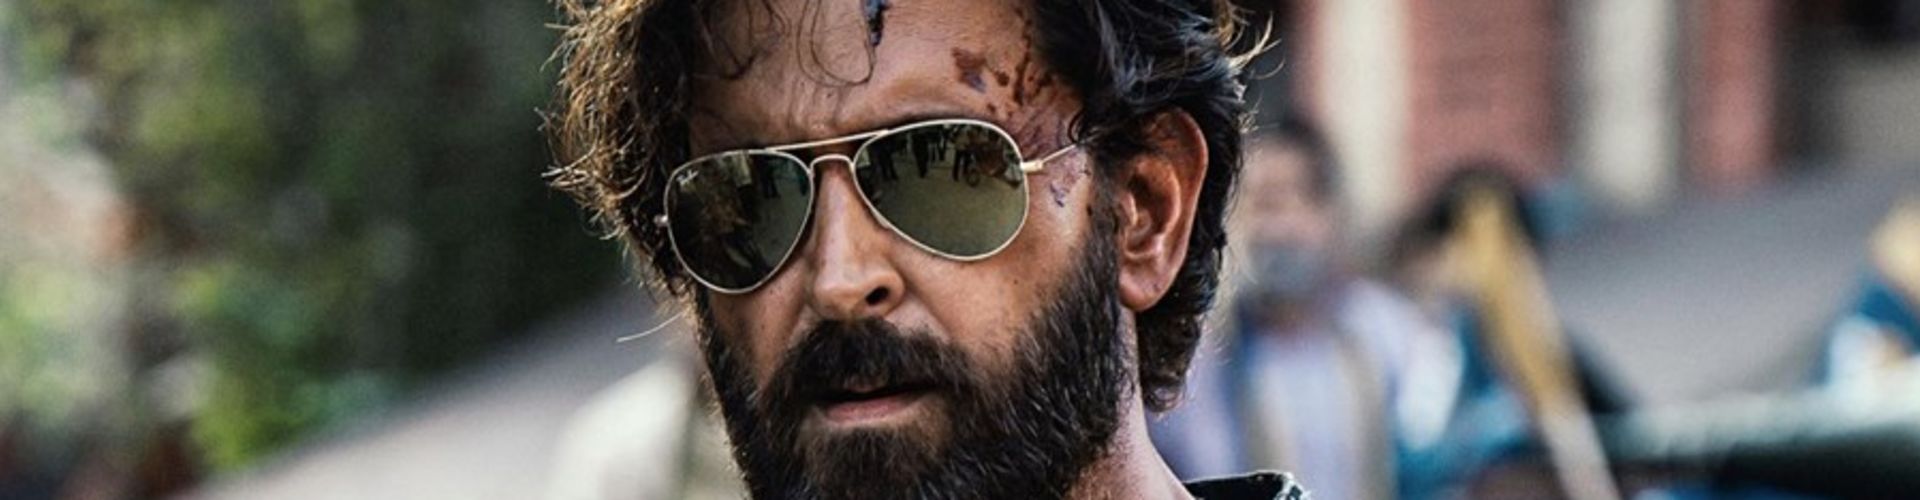 Hrithik Roshan Drops His First Look From Vikram Vedha On His Birthday